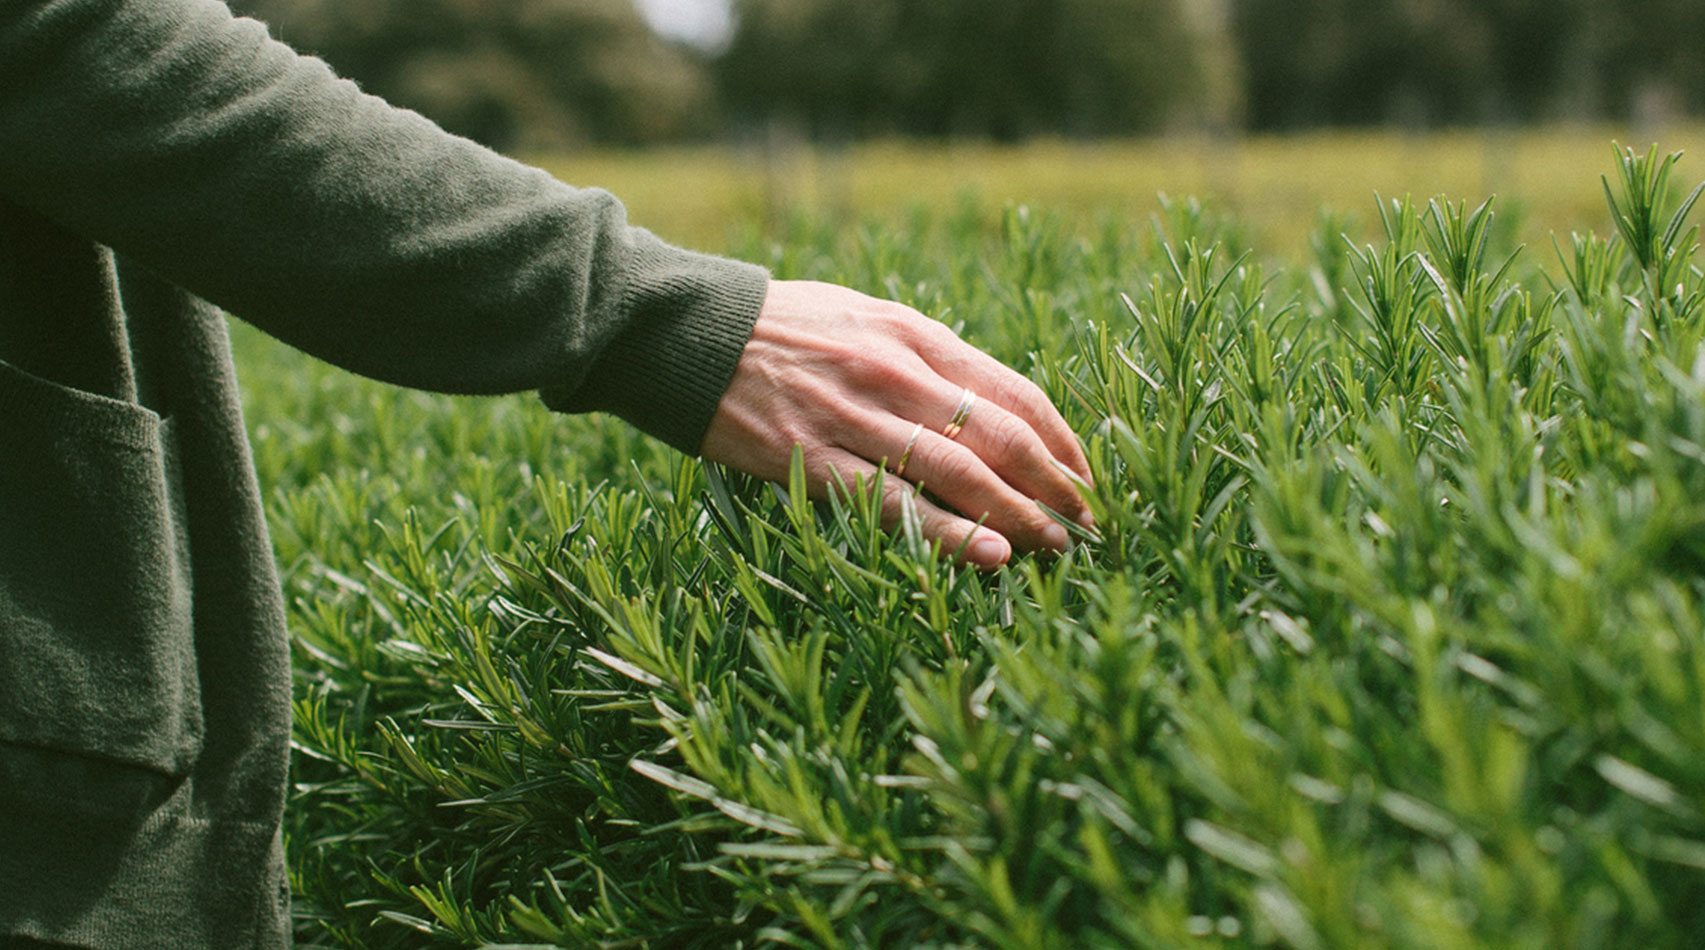 a person reaching out to feel grass